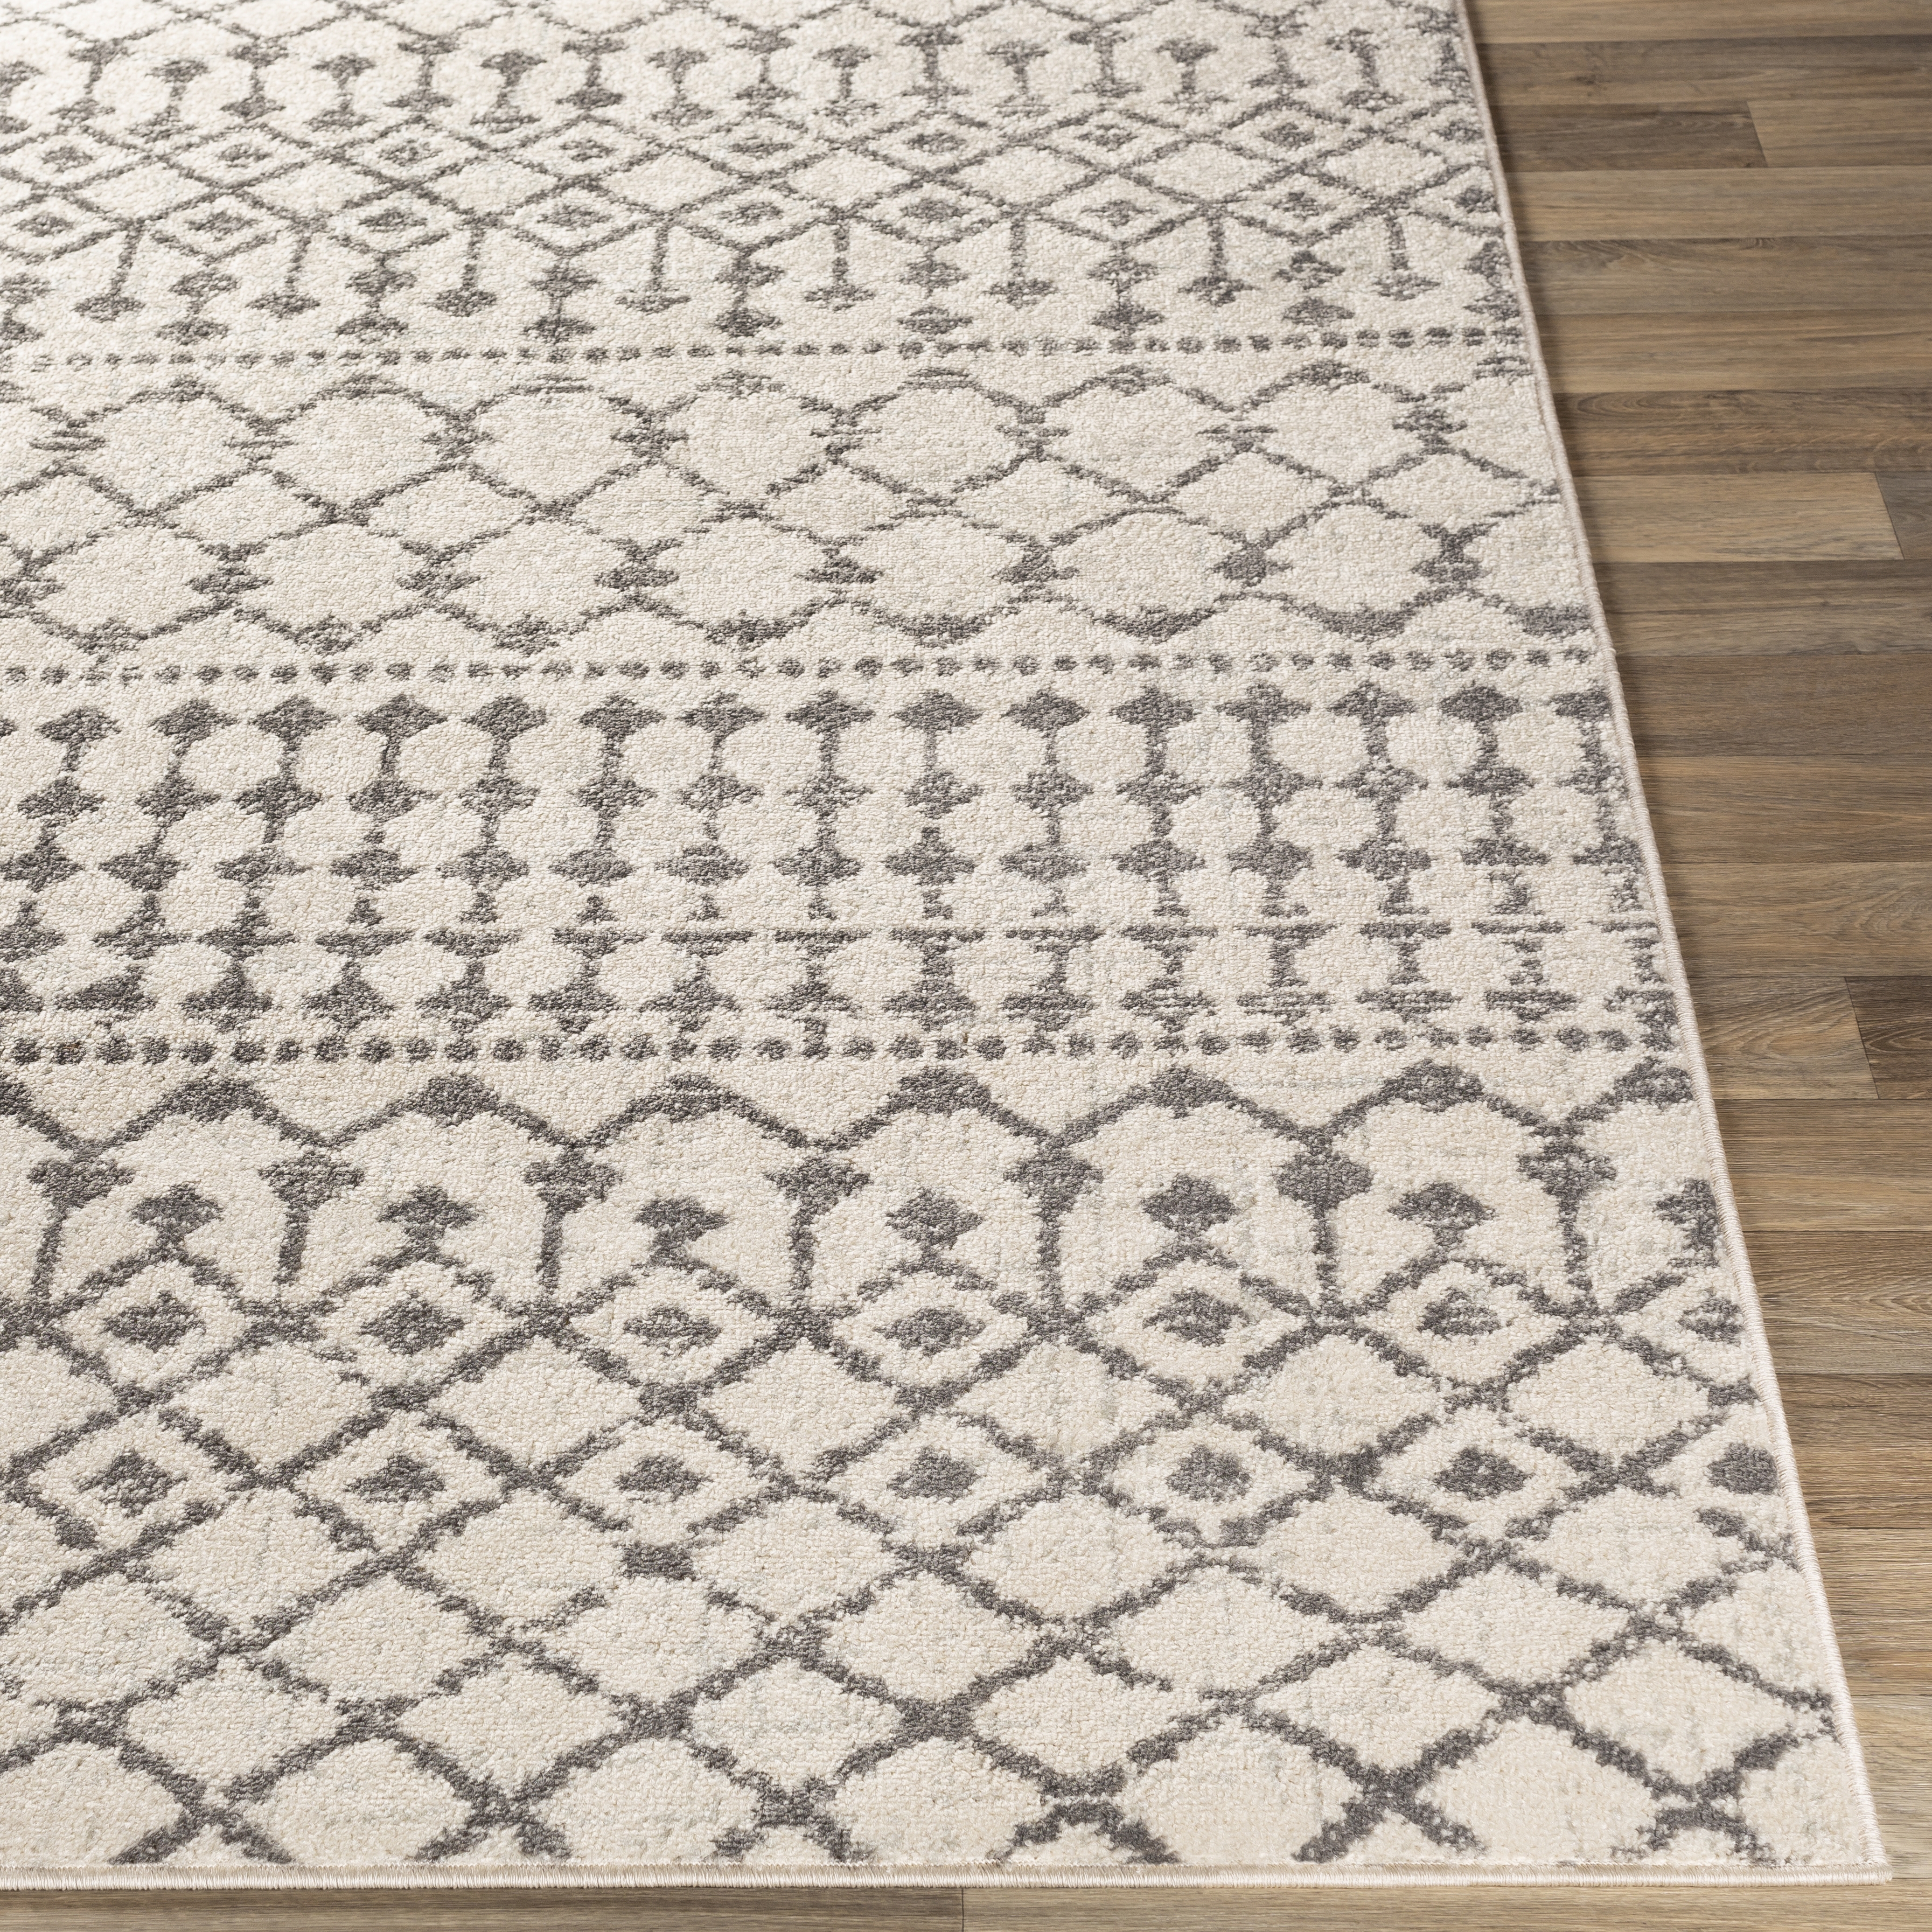 Chester Rug, 8'10" x 12' - Image 2